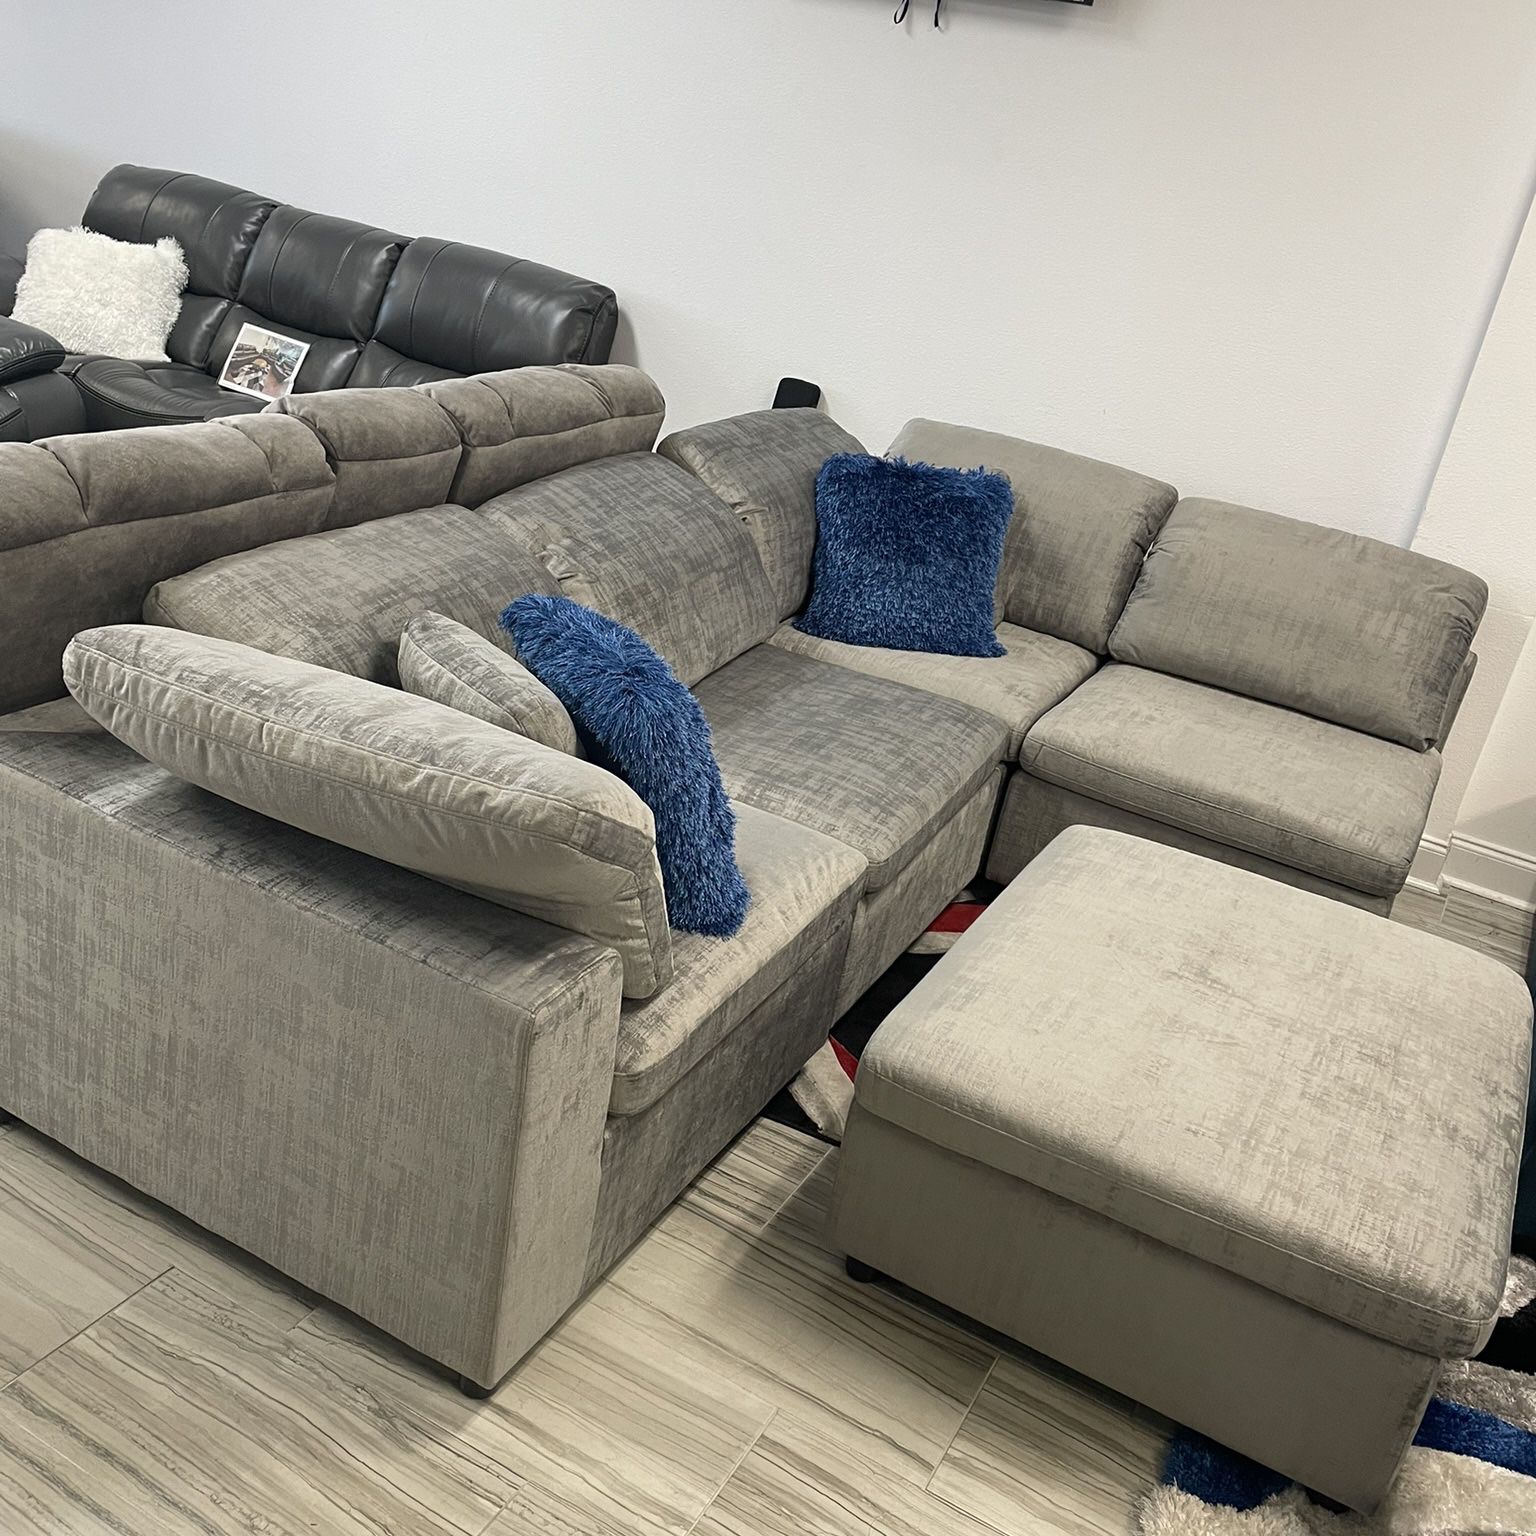 Lima Sectional With Ottoman Only $799. Easy Finance Option. Same-Day Delivery.